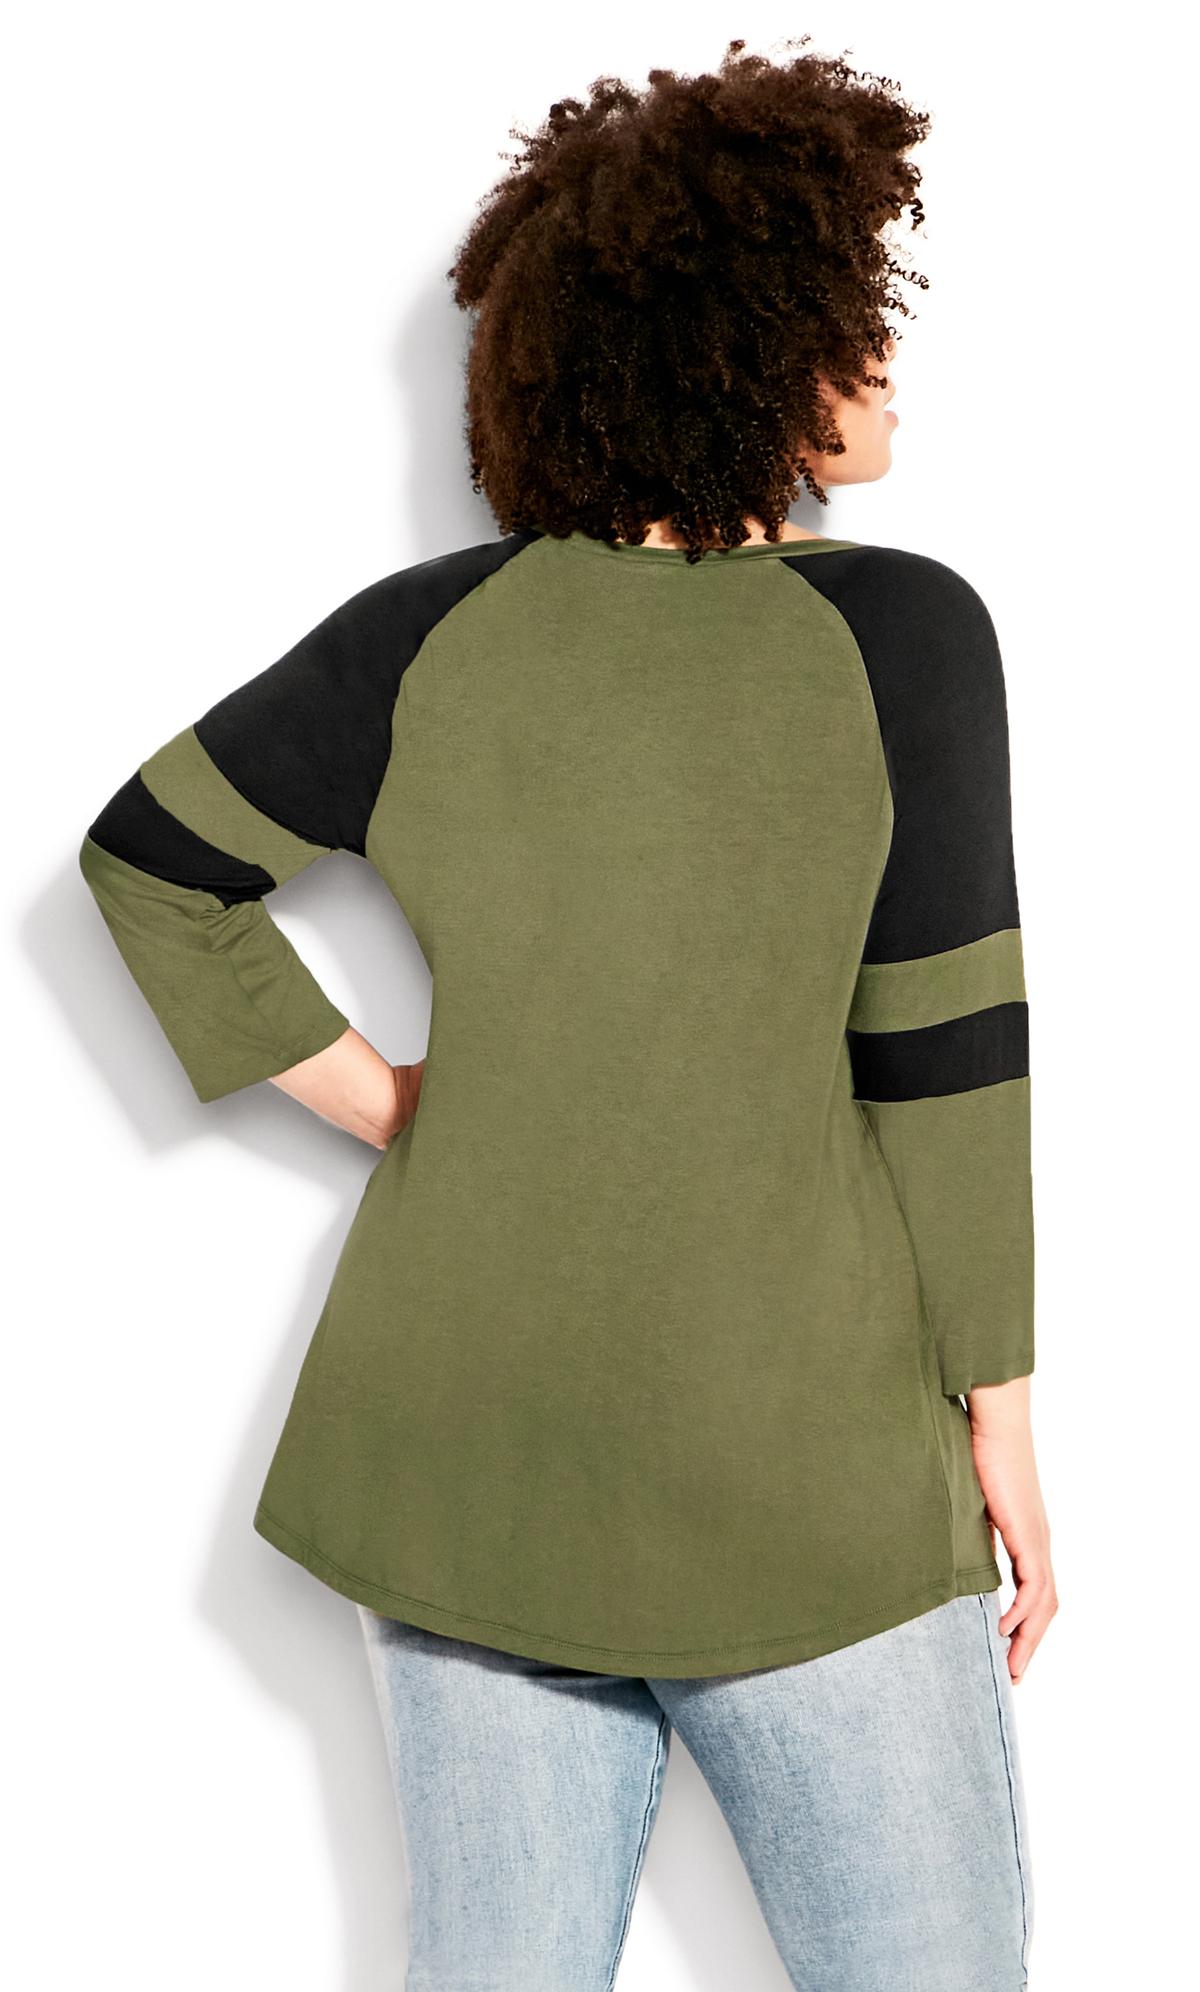 Splice Sleeve Olive Green Colour Top 3